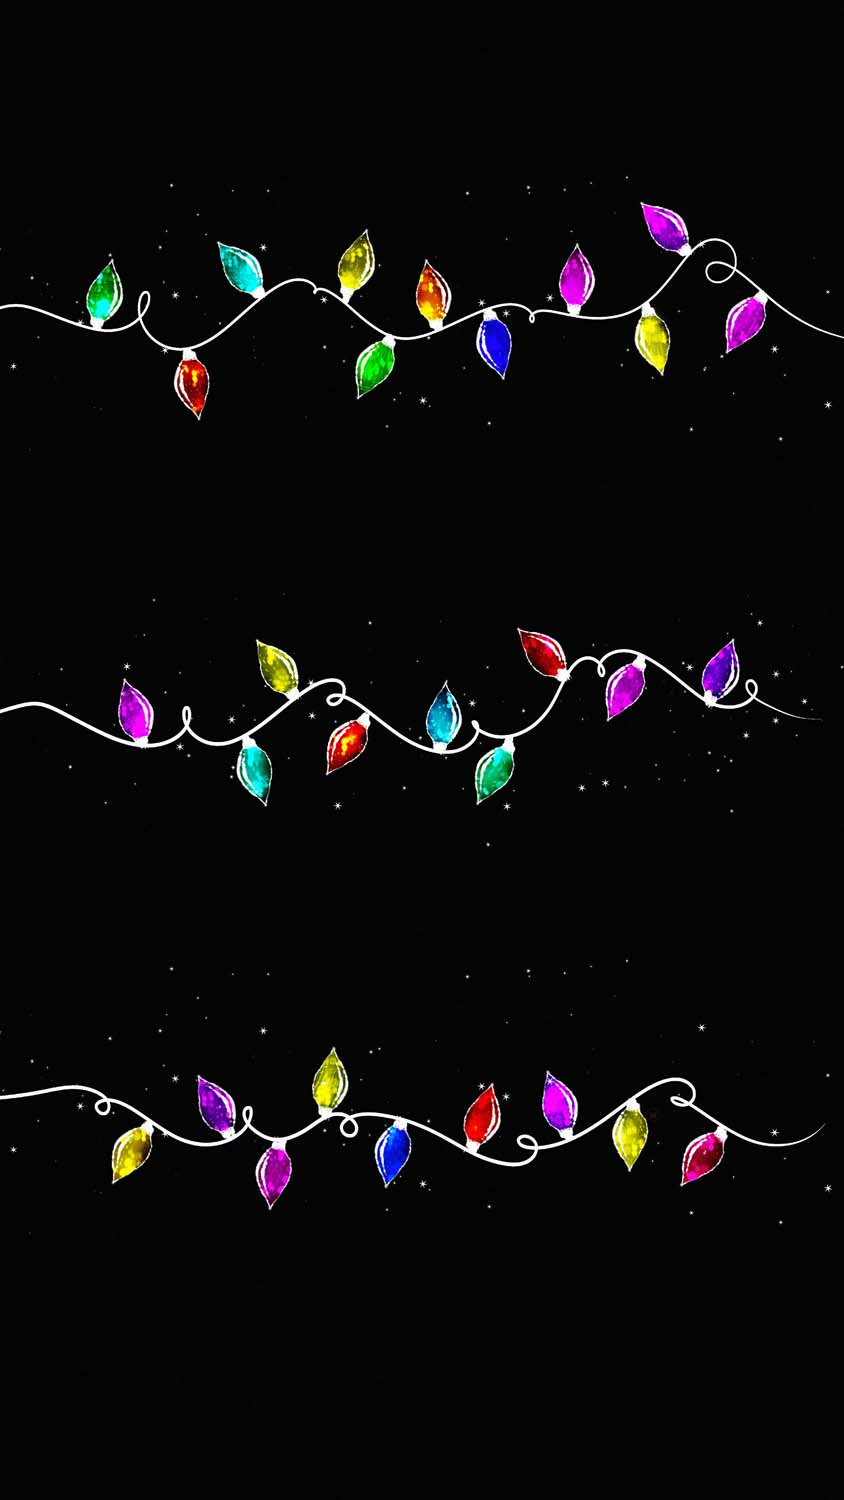 Colorful Lights Christmas IPhone Wallpaper HD  IPhone Wallpapers